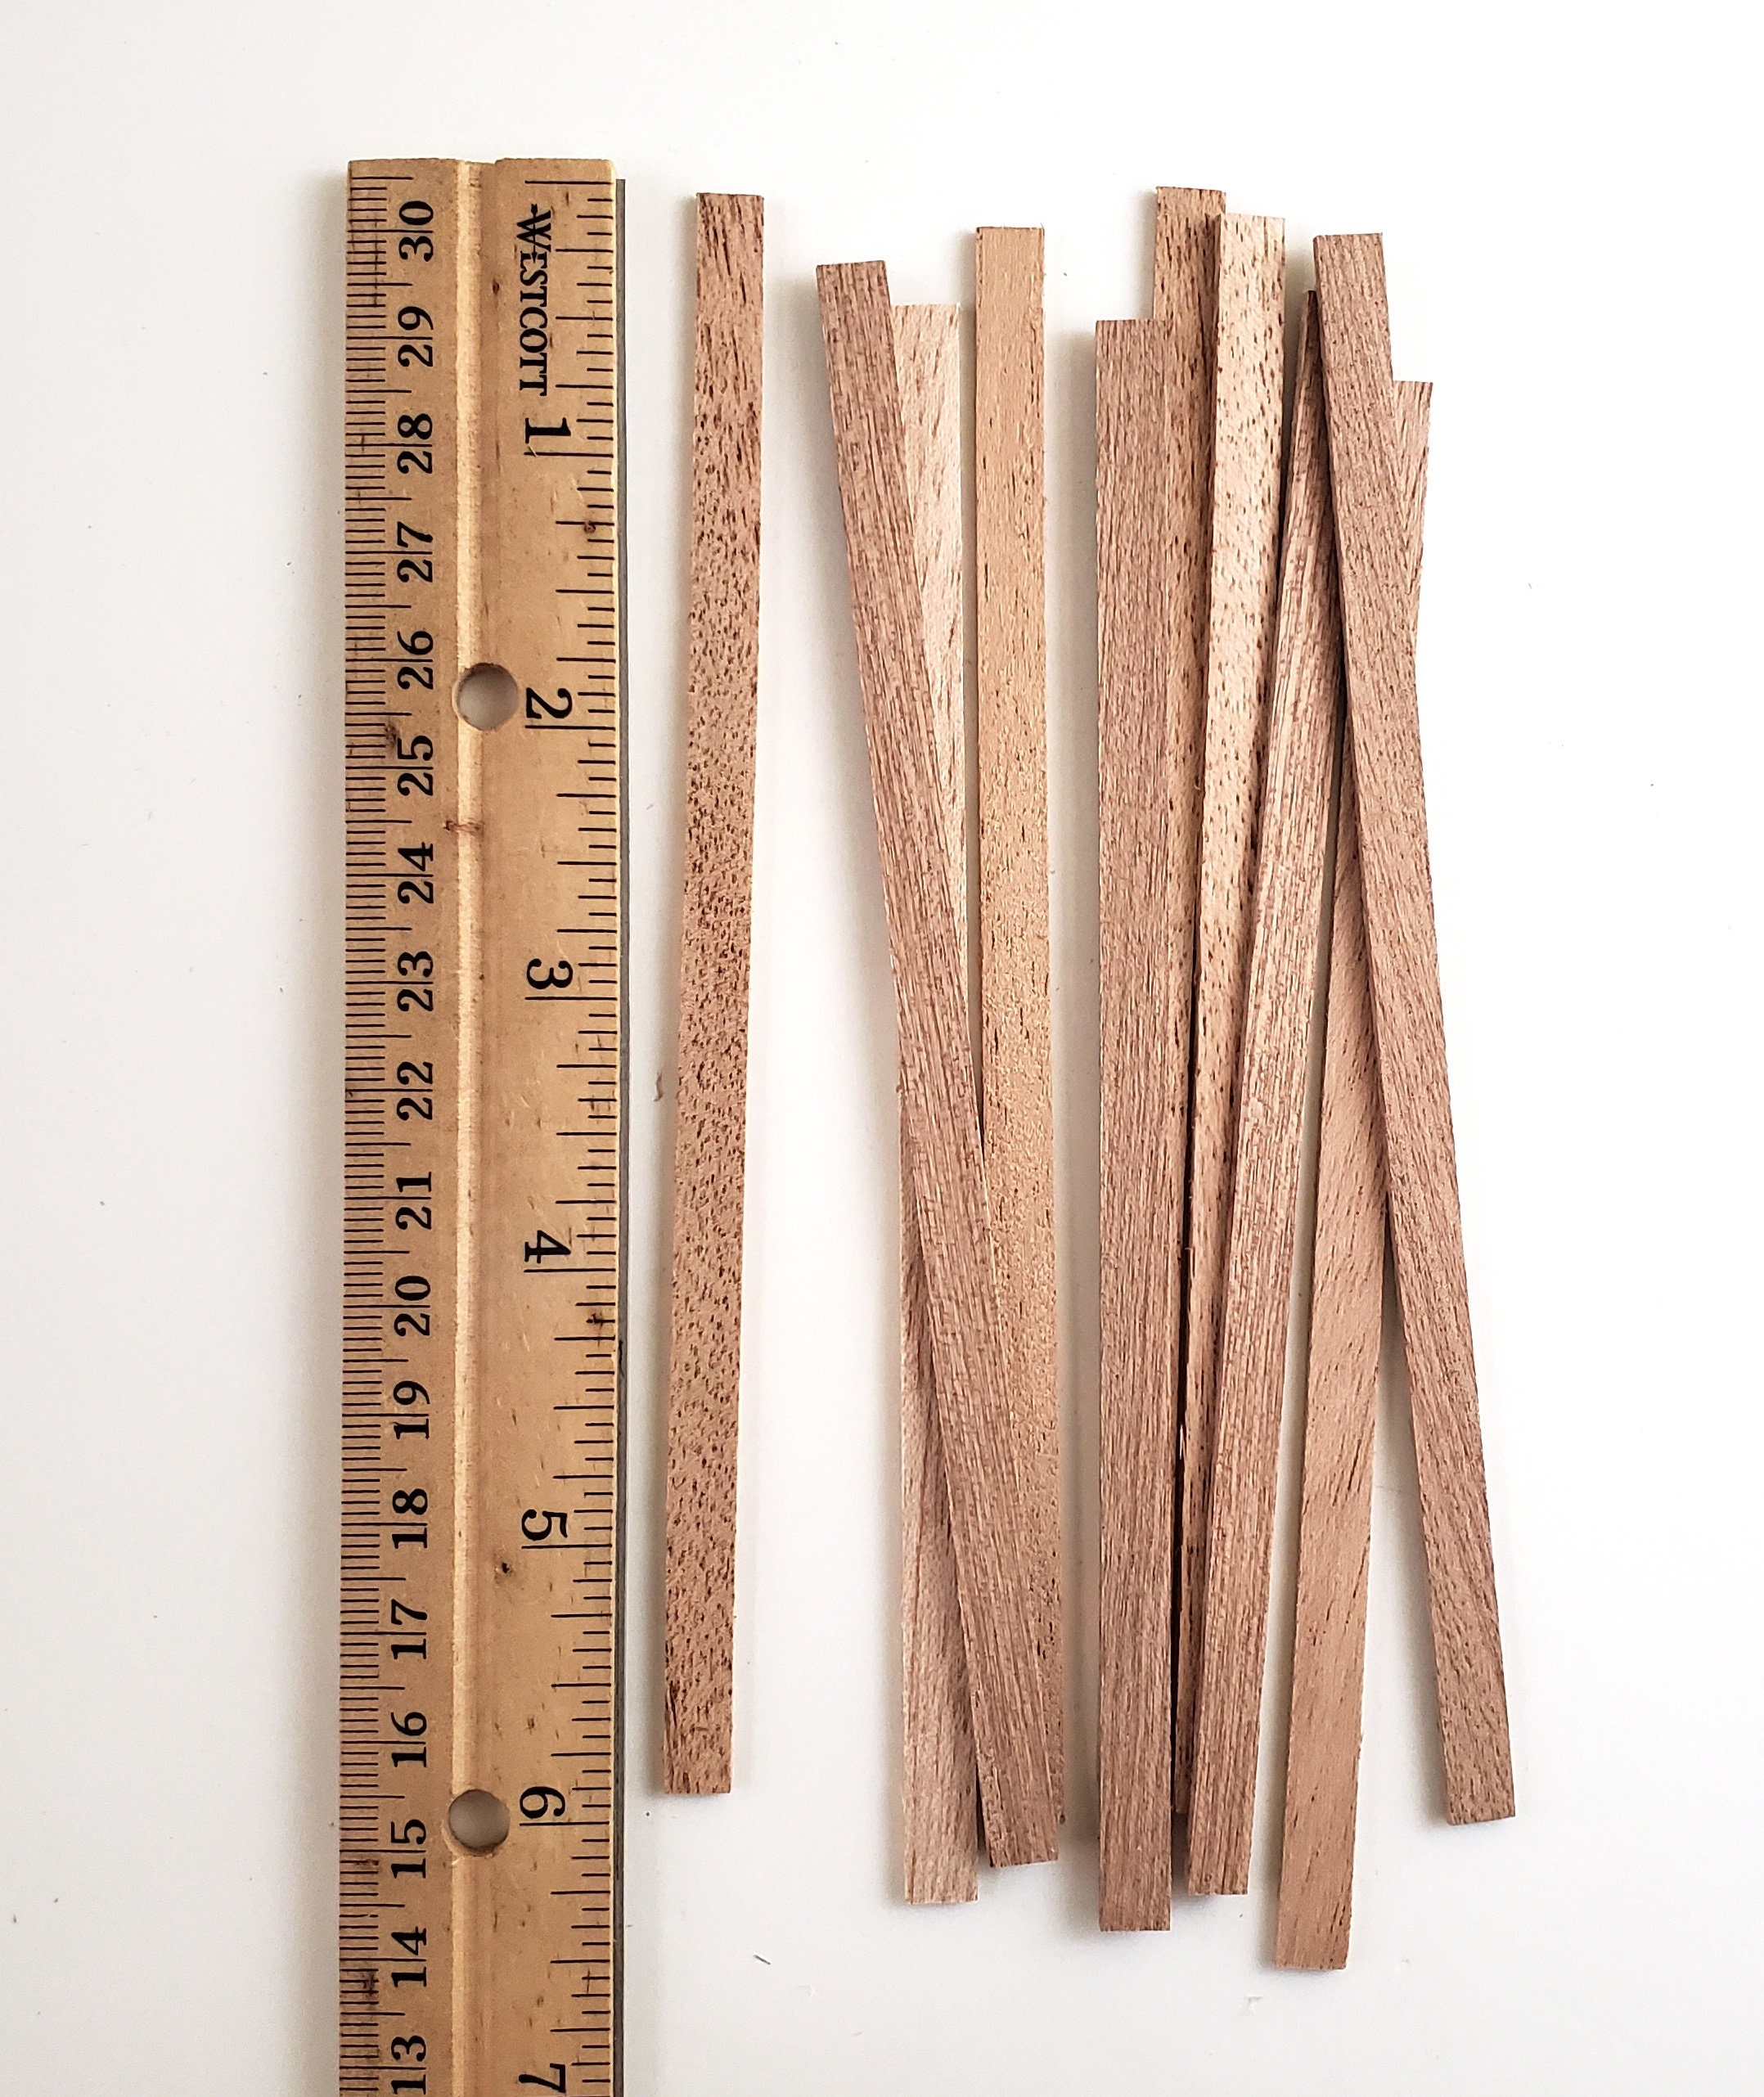 Mahogany Wood Strips 1/8 x 3 x 24in (5) - Quantity is Listed in Parenthesis  in Title